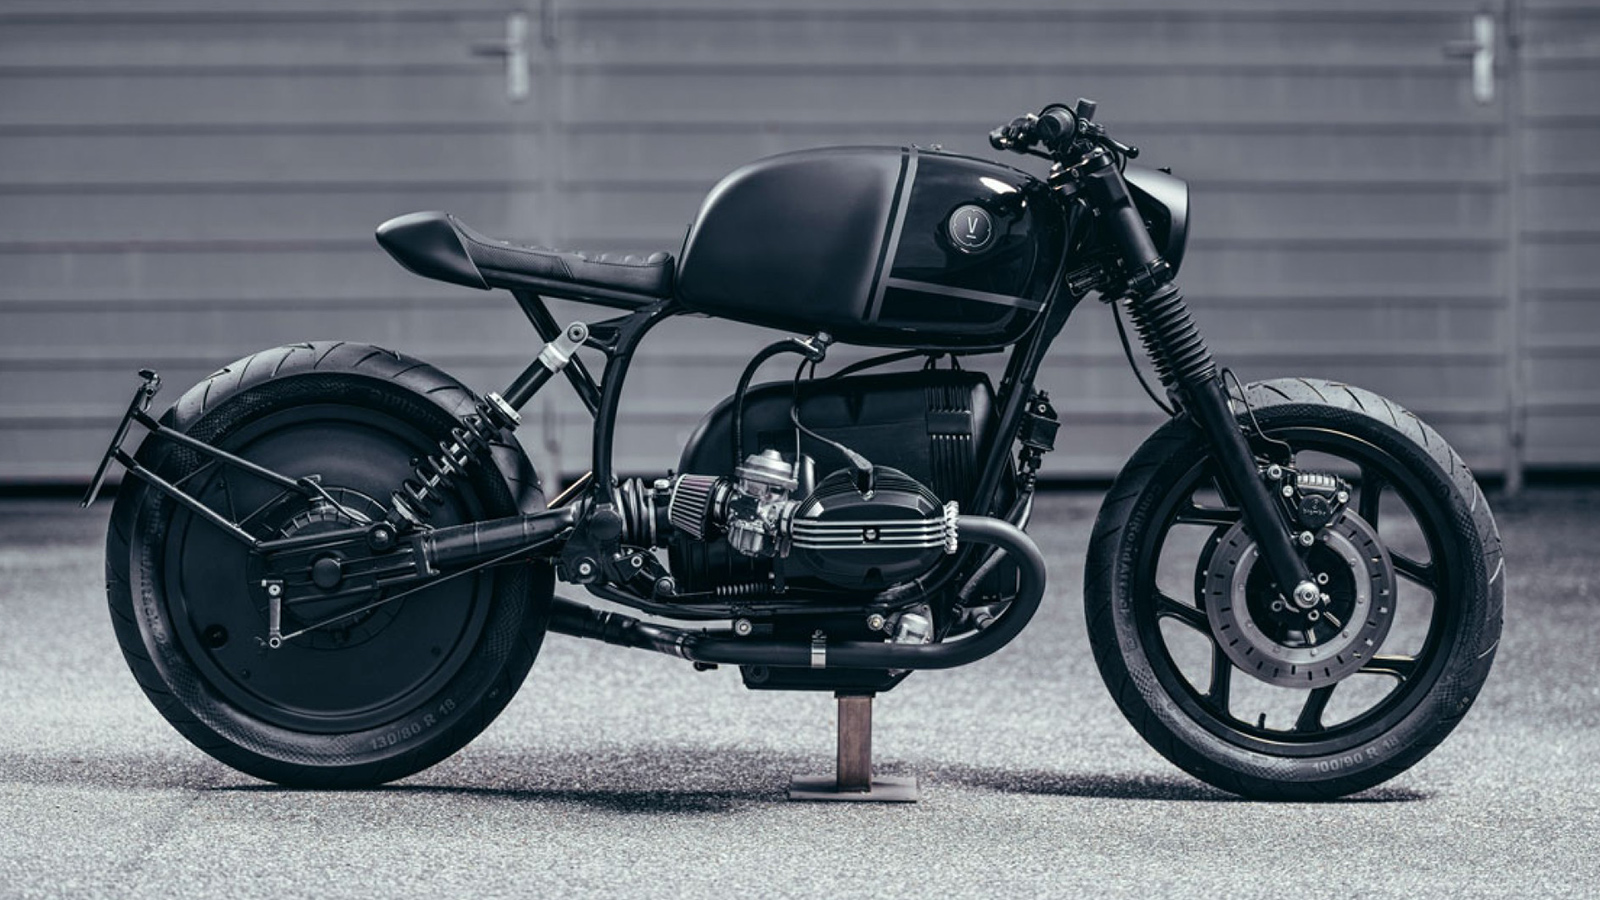 This Motorcycle Is Made With 3D-Printed Parts - IMBOLDN